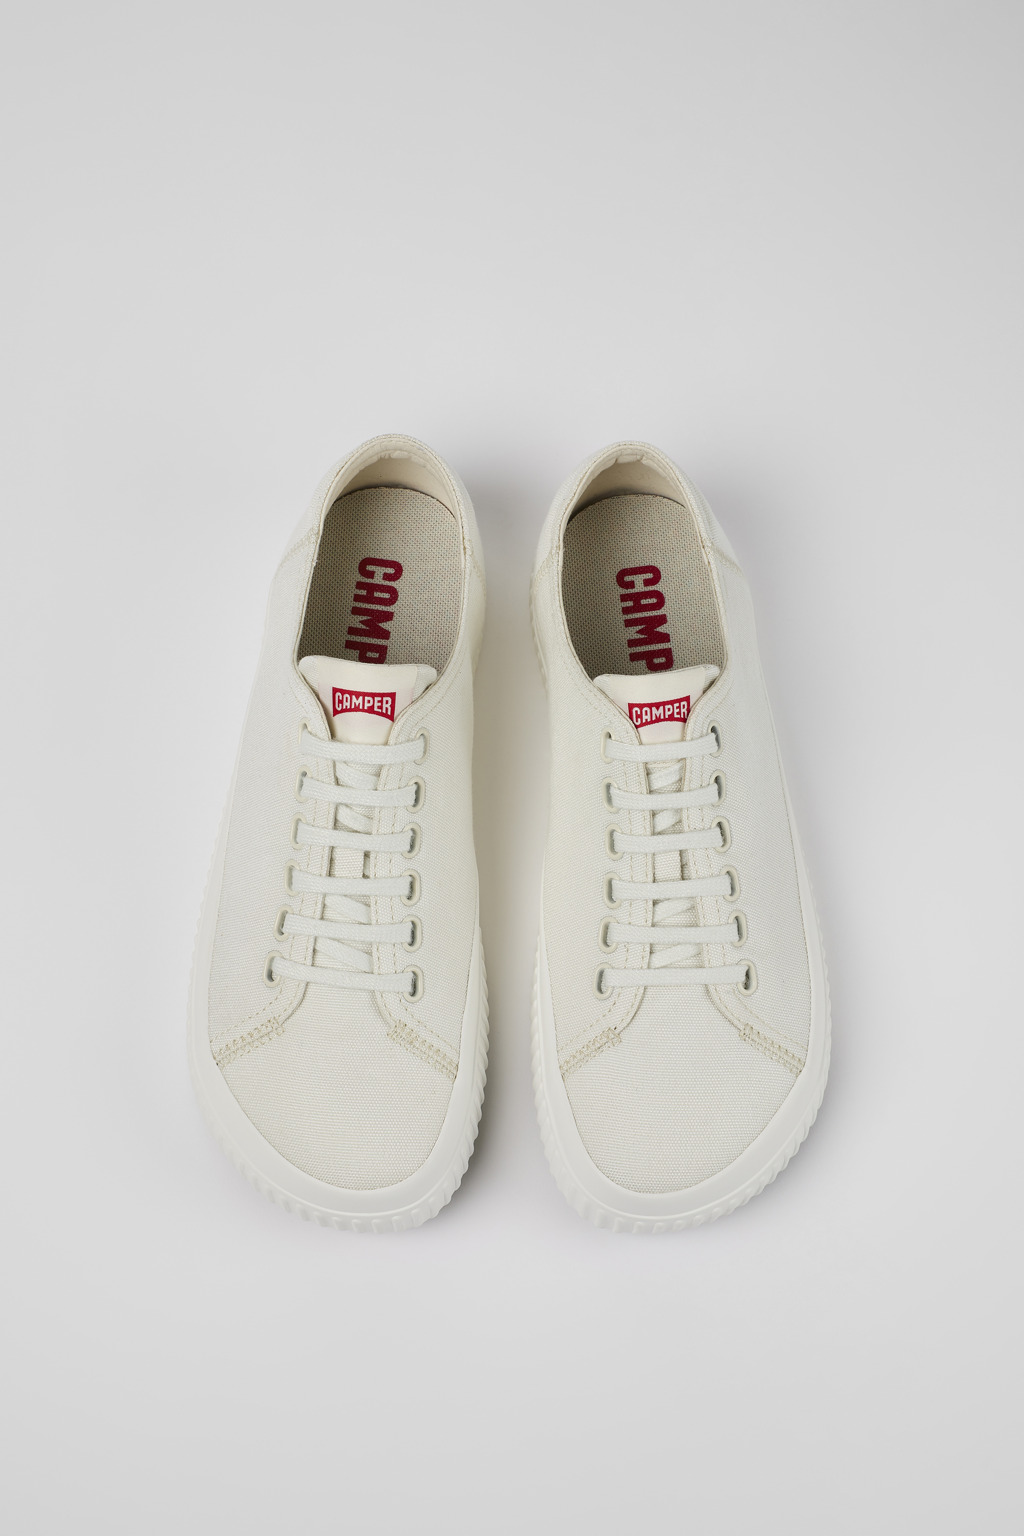 Peu White Sneakers for Men - Spring/Summer collection - Camper 